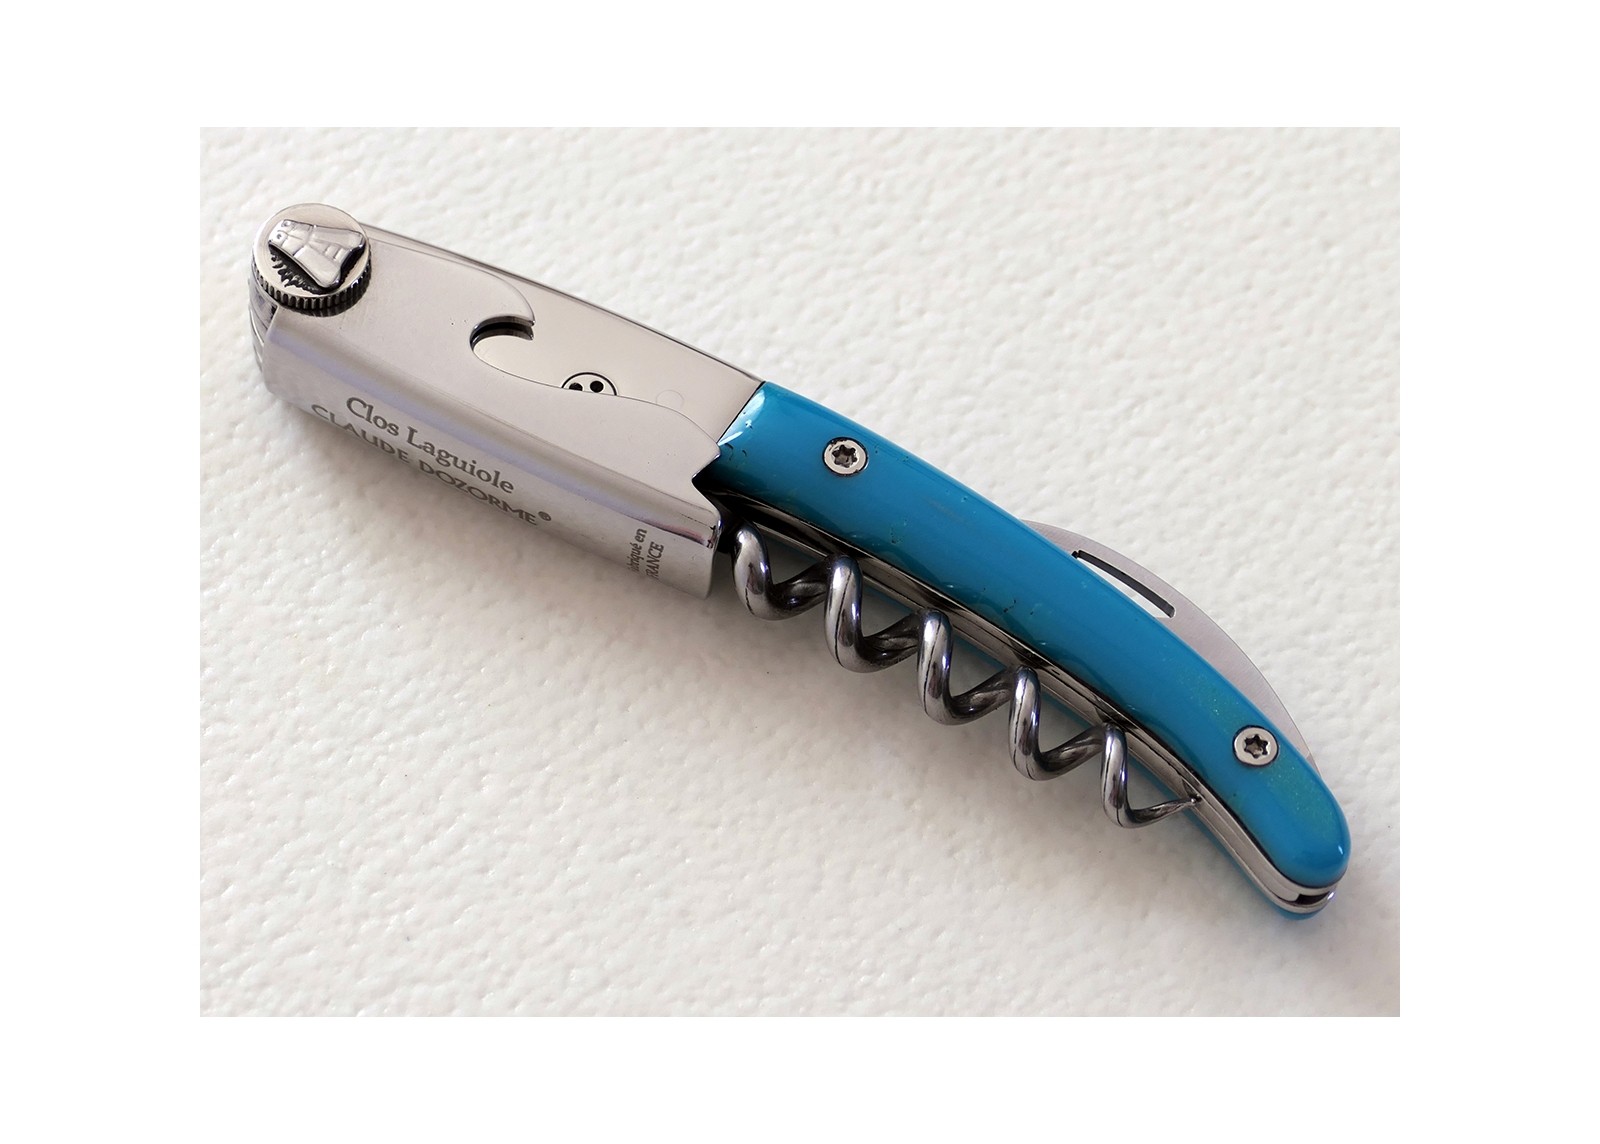 https://laguiole-17592.kxcdn.com/20197-large_default/laguiole-corkscrew-with-turquoise-tinted-resin-handle-and-stainless-steel-bolster.jpg